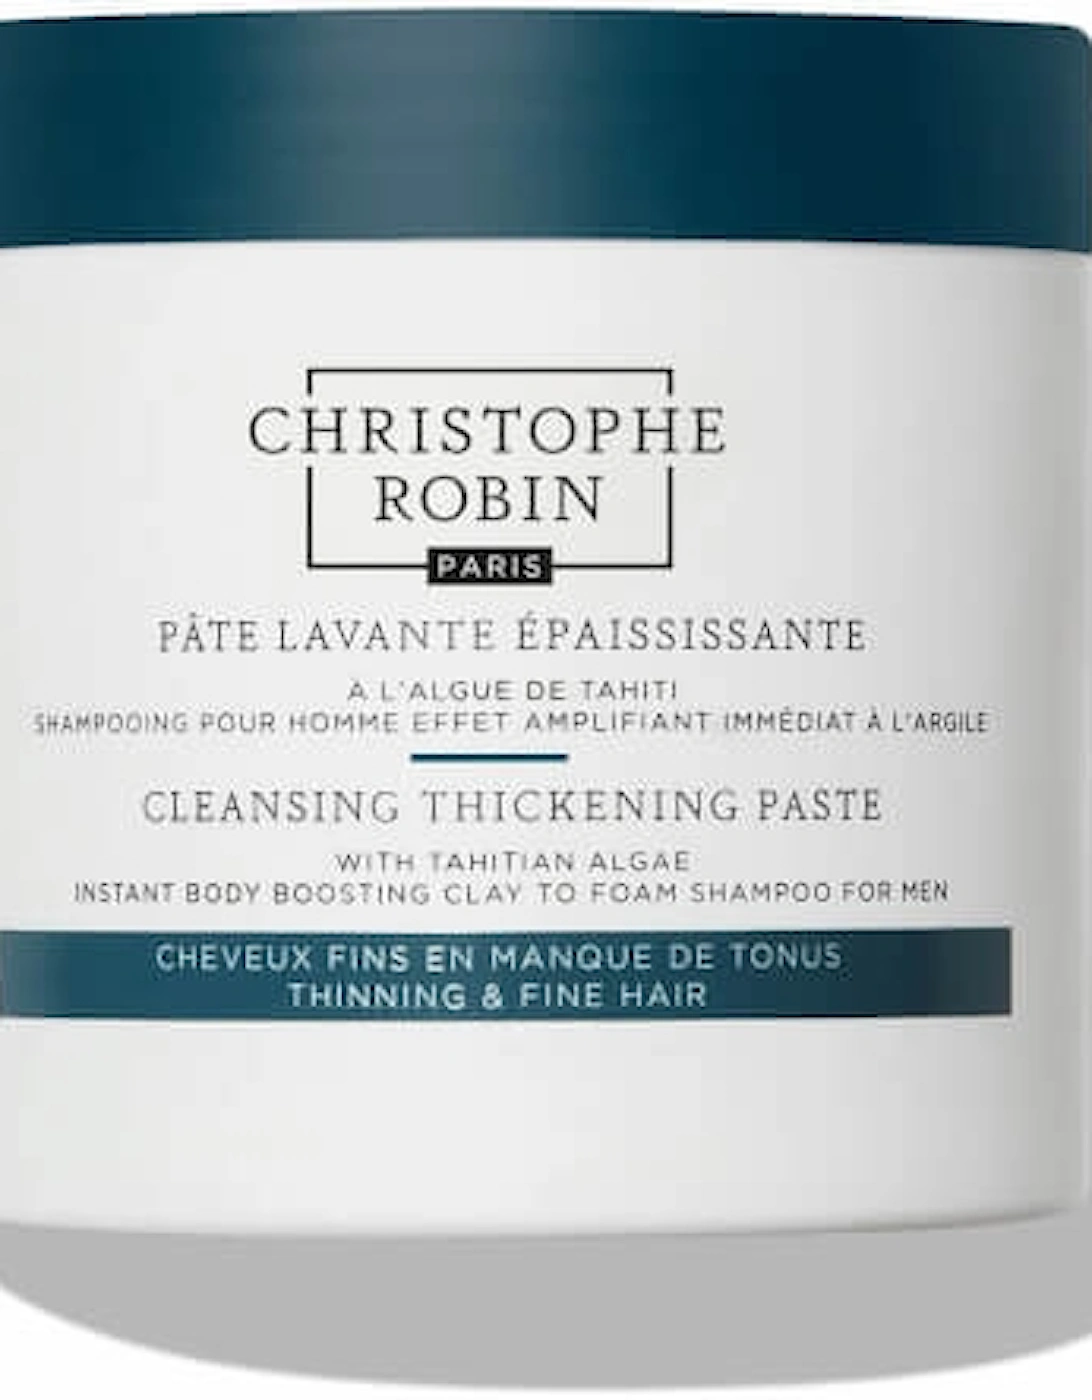 Cleansing Thickening Paste with Pure Rassoul Clay and Tahitian Algae 250ml - - Cleansing Thickening Paste with Pure Rassoul Clay and Tahitian Algae (250ml) - Kristoffer - Cleansing Thickening Paste with Pure Rassoul Clay and Tahitian Algae (250ml) - Petehan - Cleansing Thickening Paste with Pure Rassoul Clay and Tahitian Algae - Sweden102x, 2 of 1